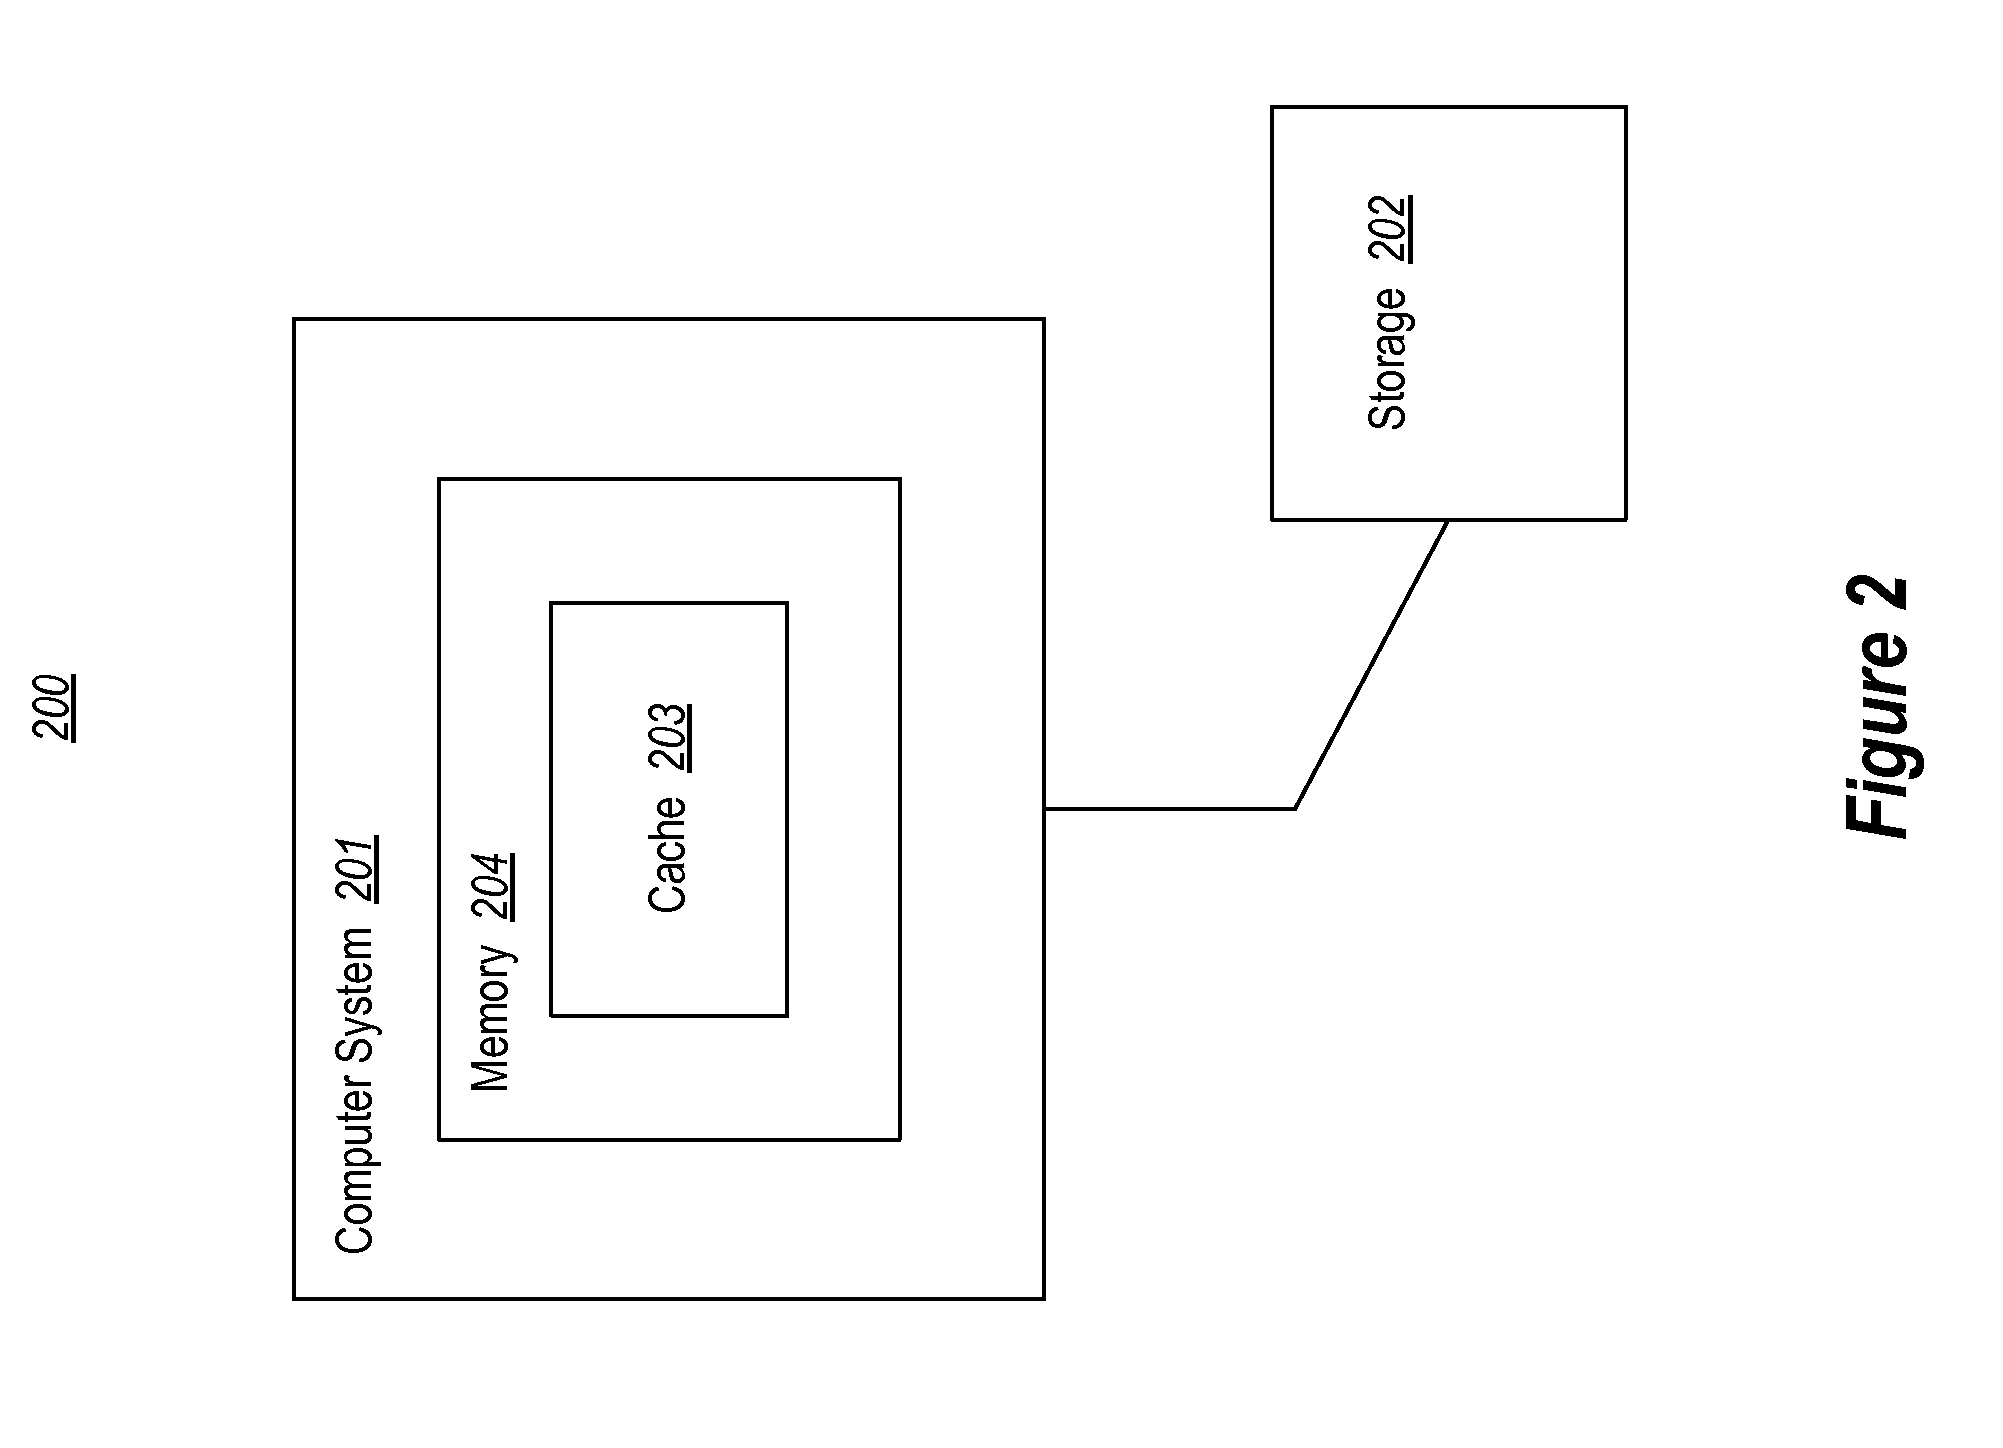 Cache employing multiple page replacement algorithms